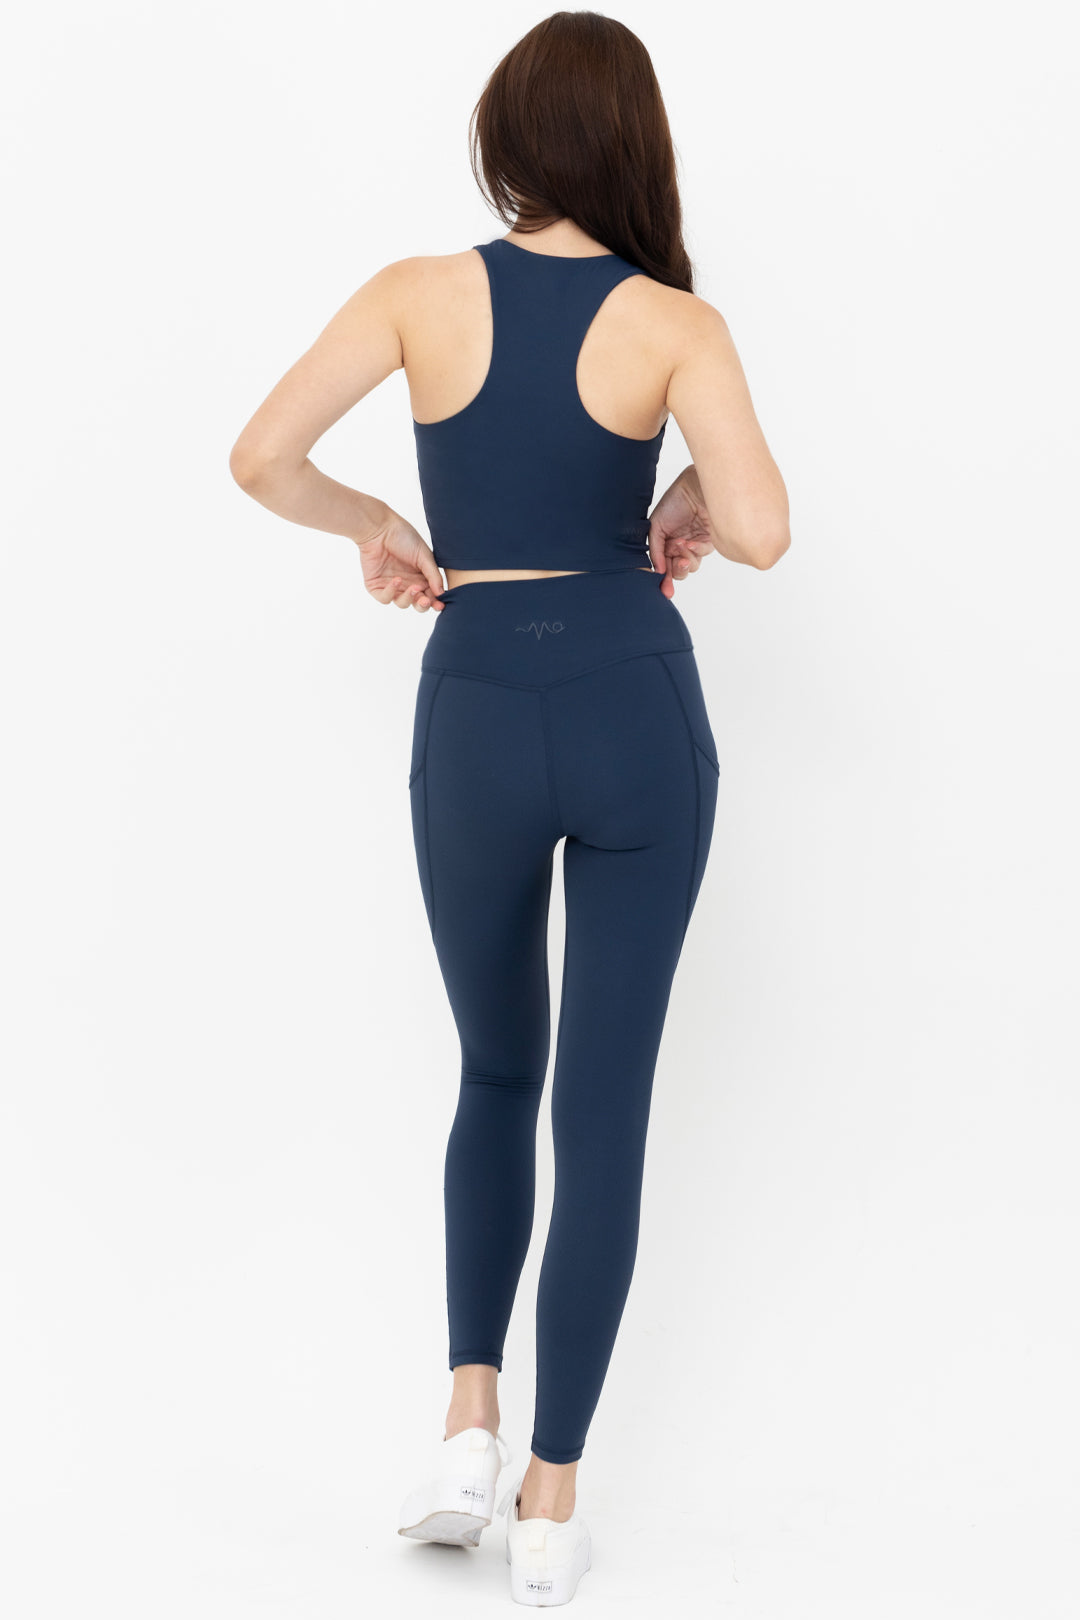 Gymshark Crossover leggings NWT Blue Size M - $30 New With Tags - From Riose